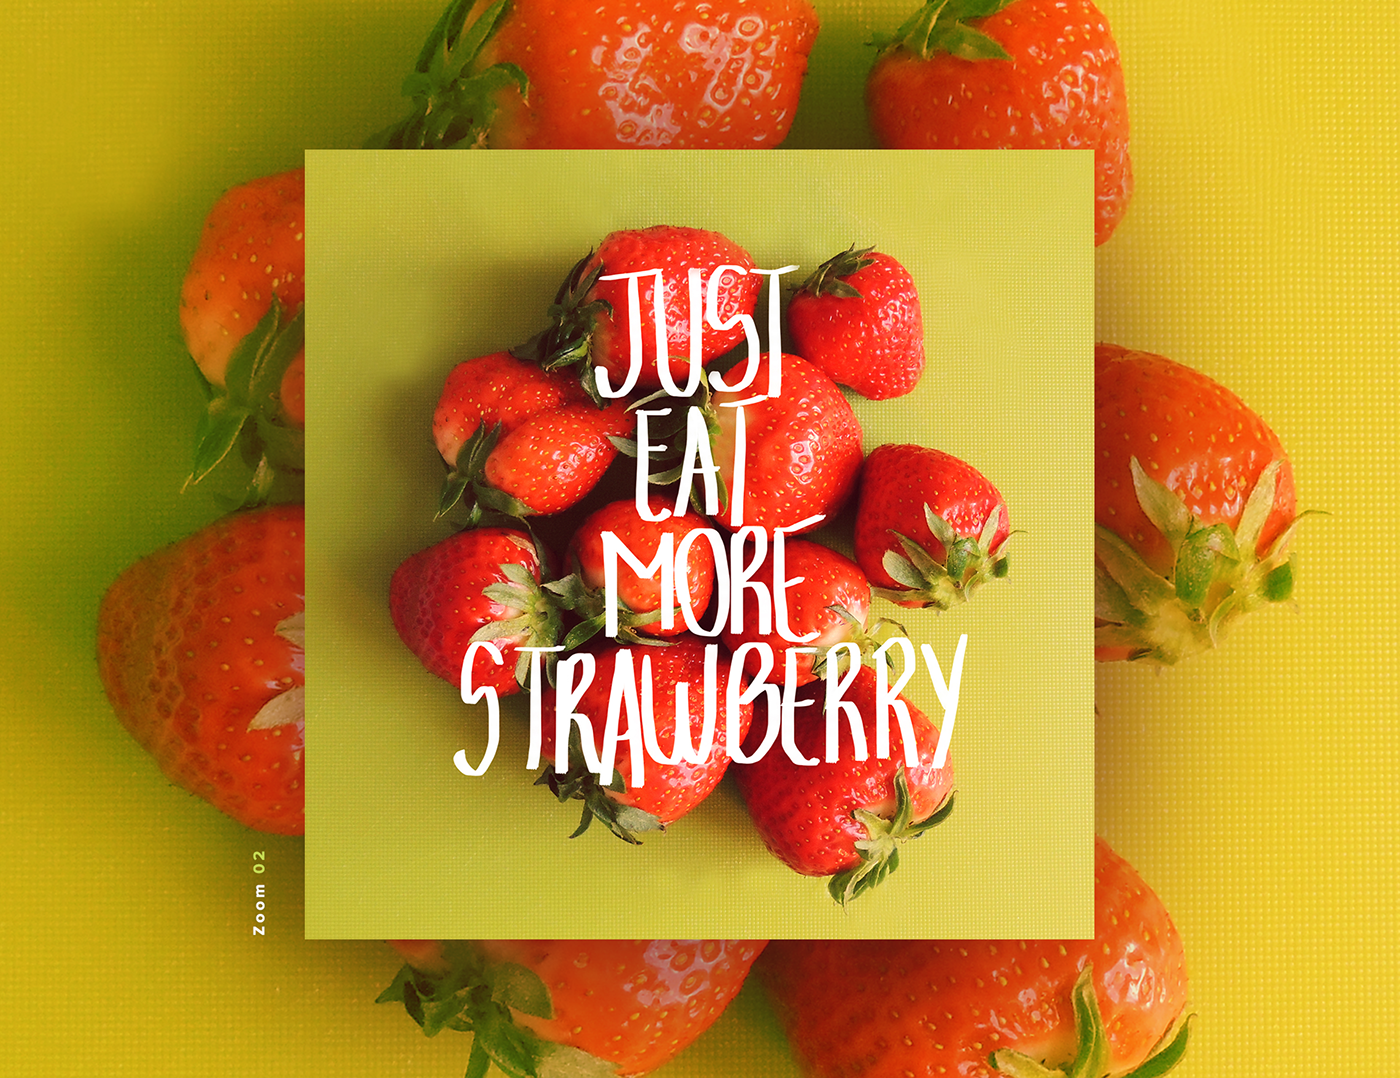 strawberry Project homemade tomatoes banana Tomato berry thorns colors fruits Fun healthy